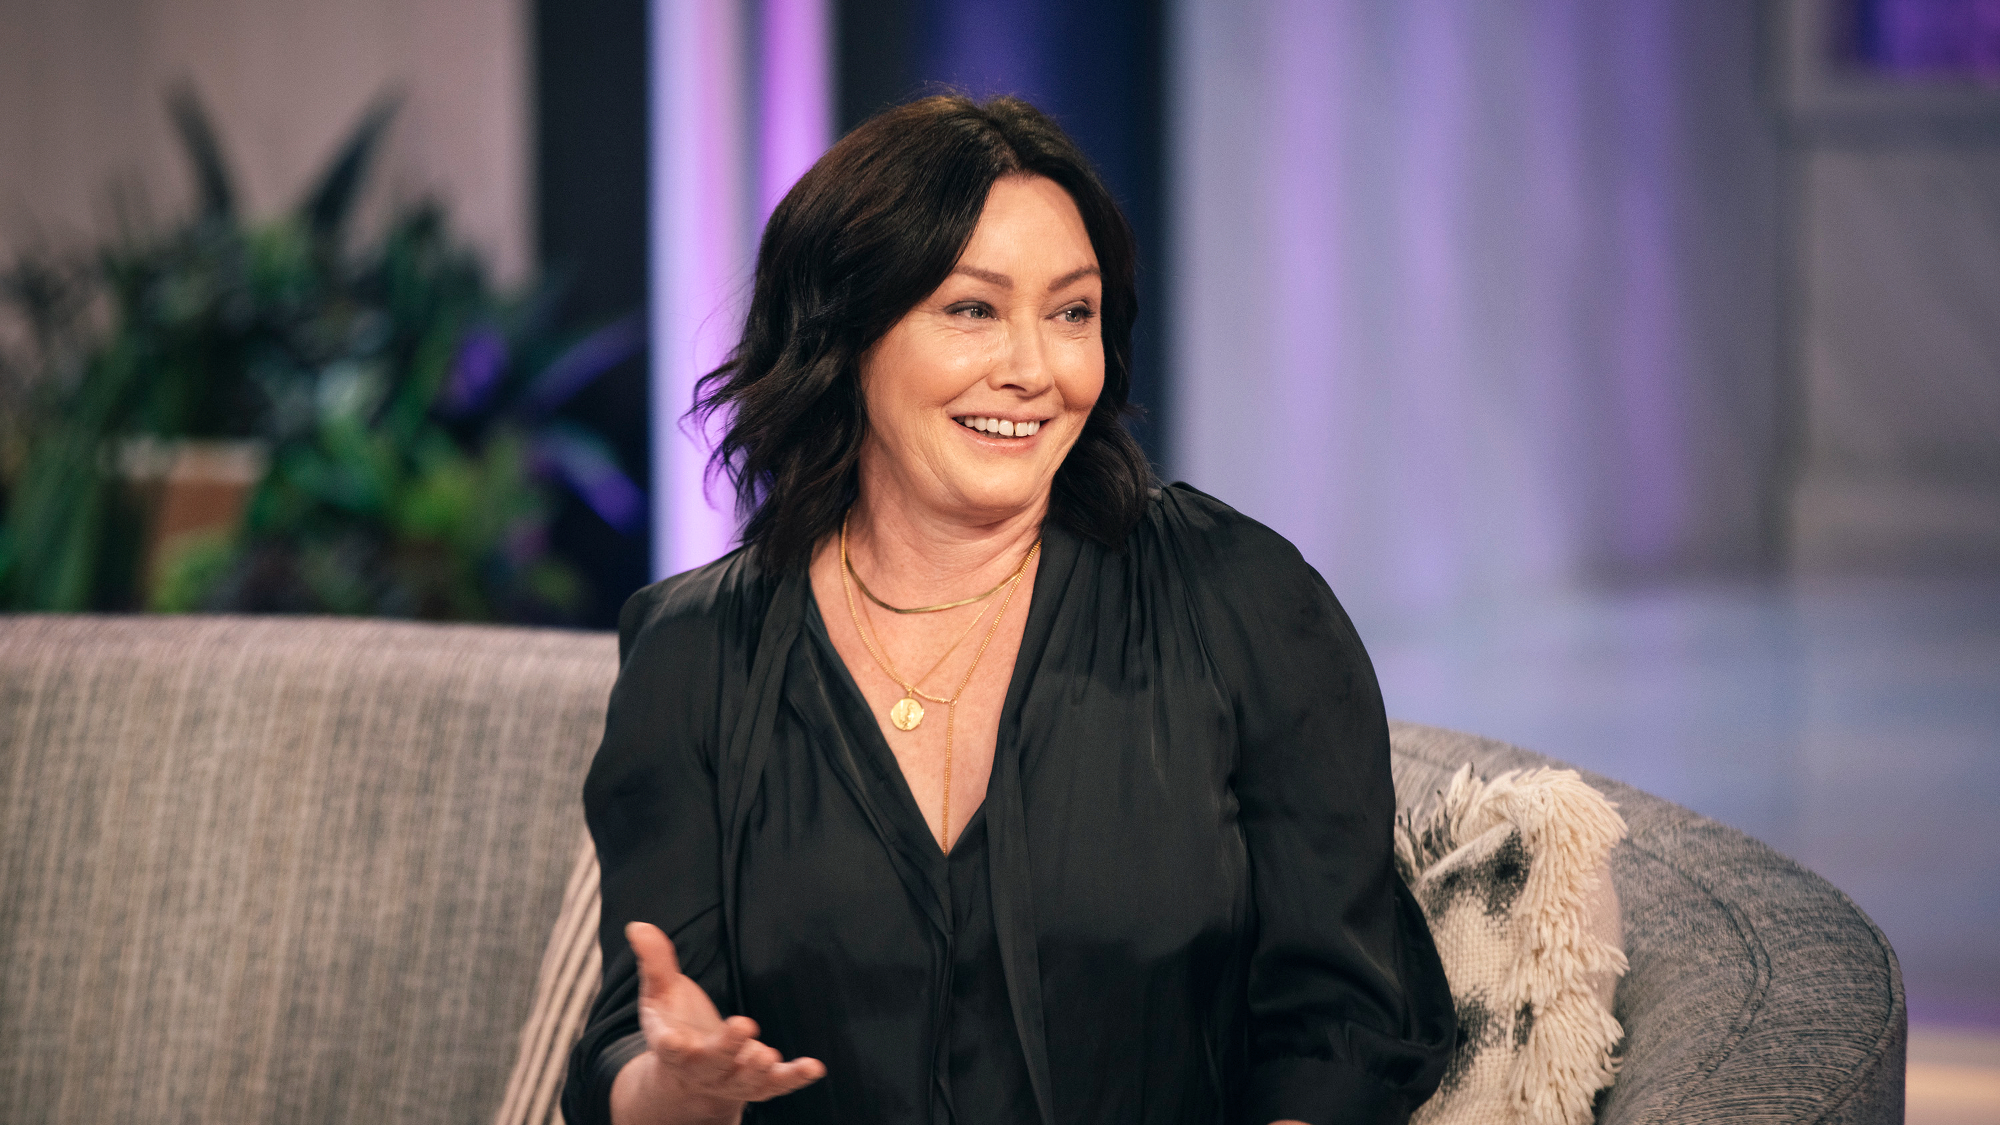  Shannen Doherty, star of '90210,' dies at 53 